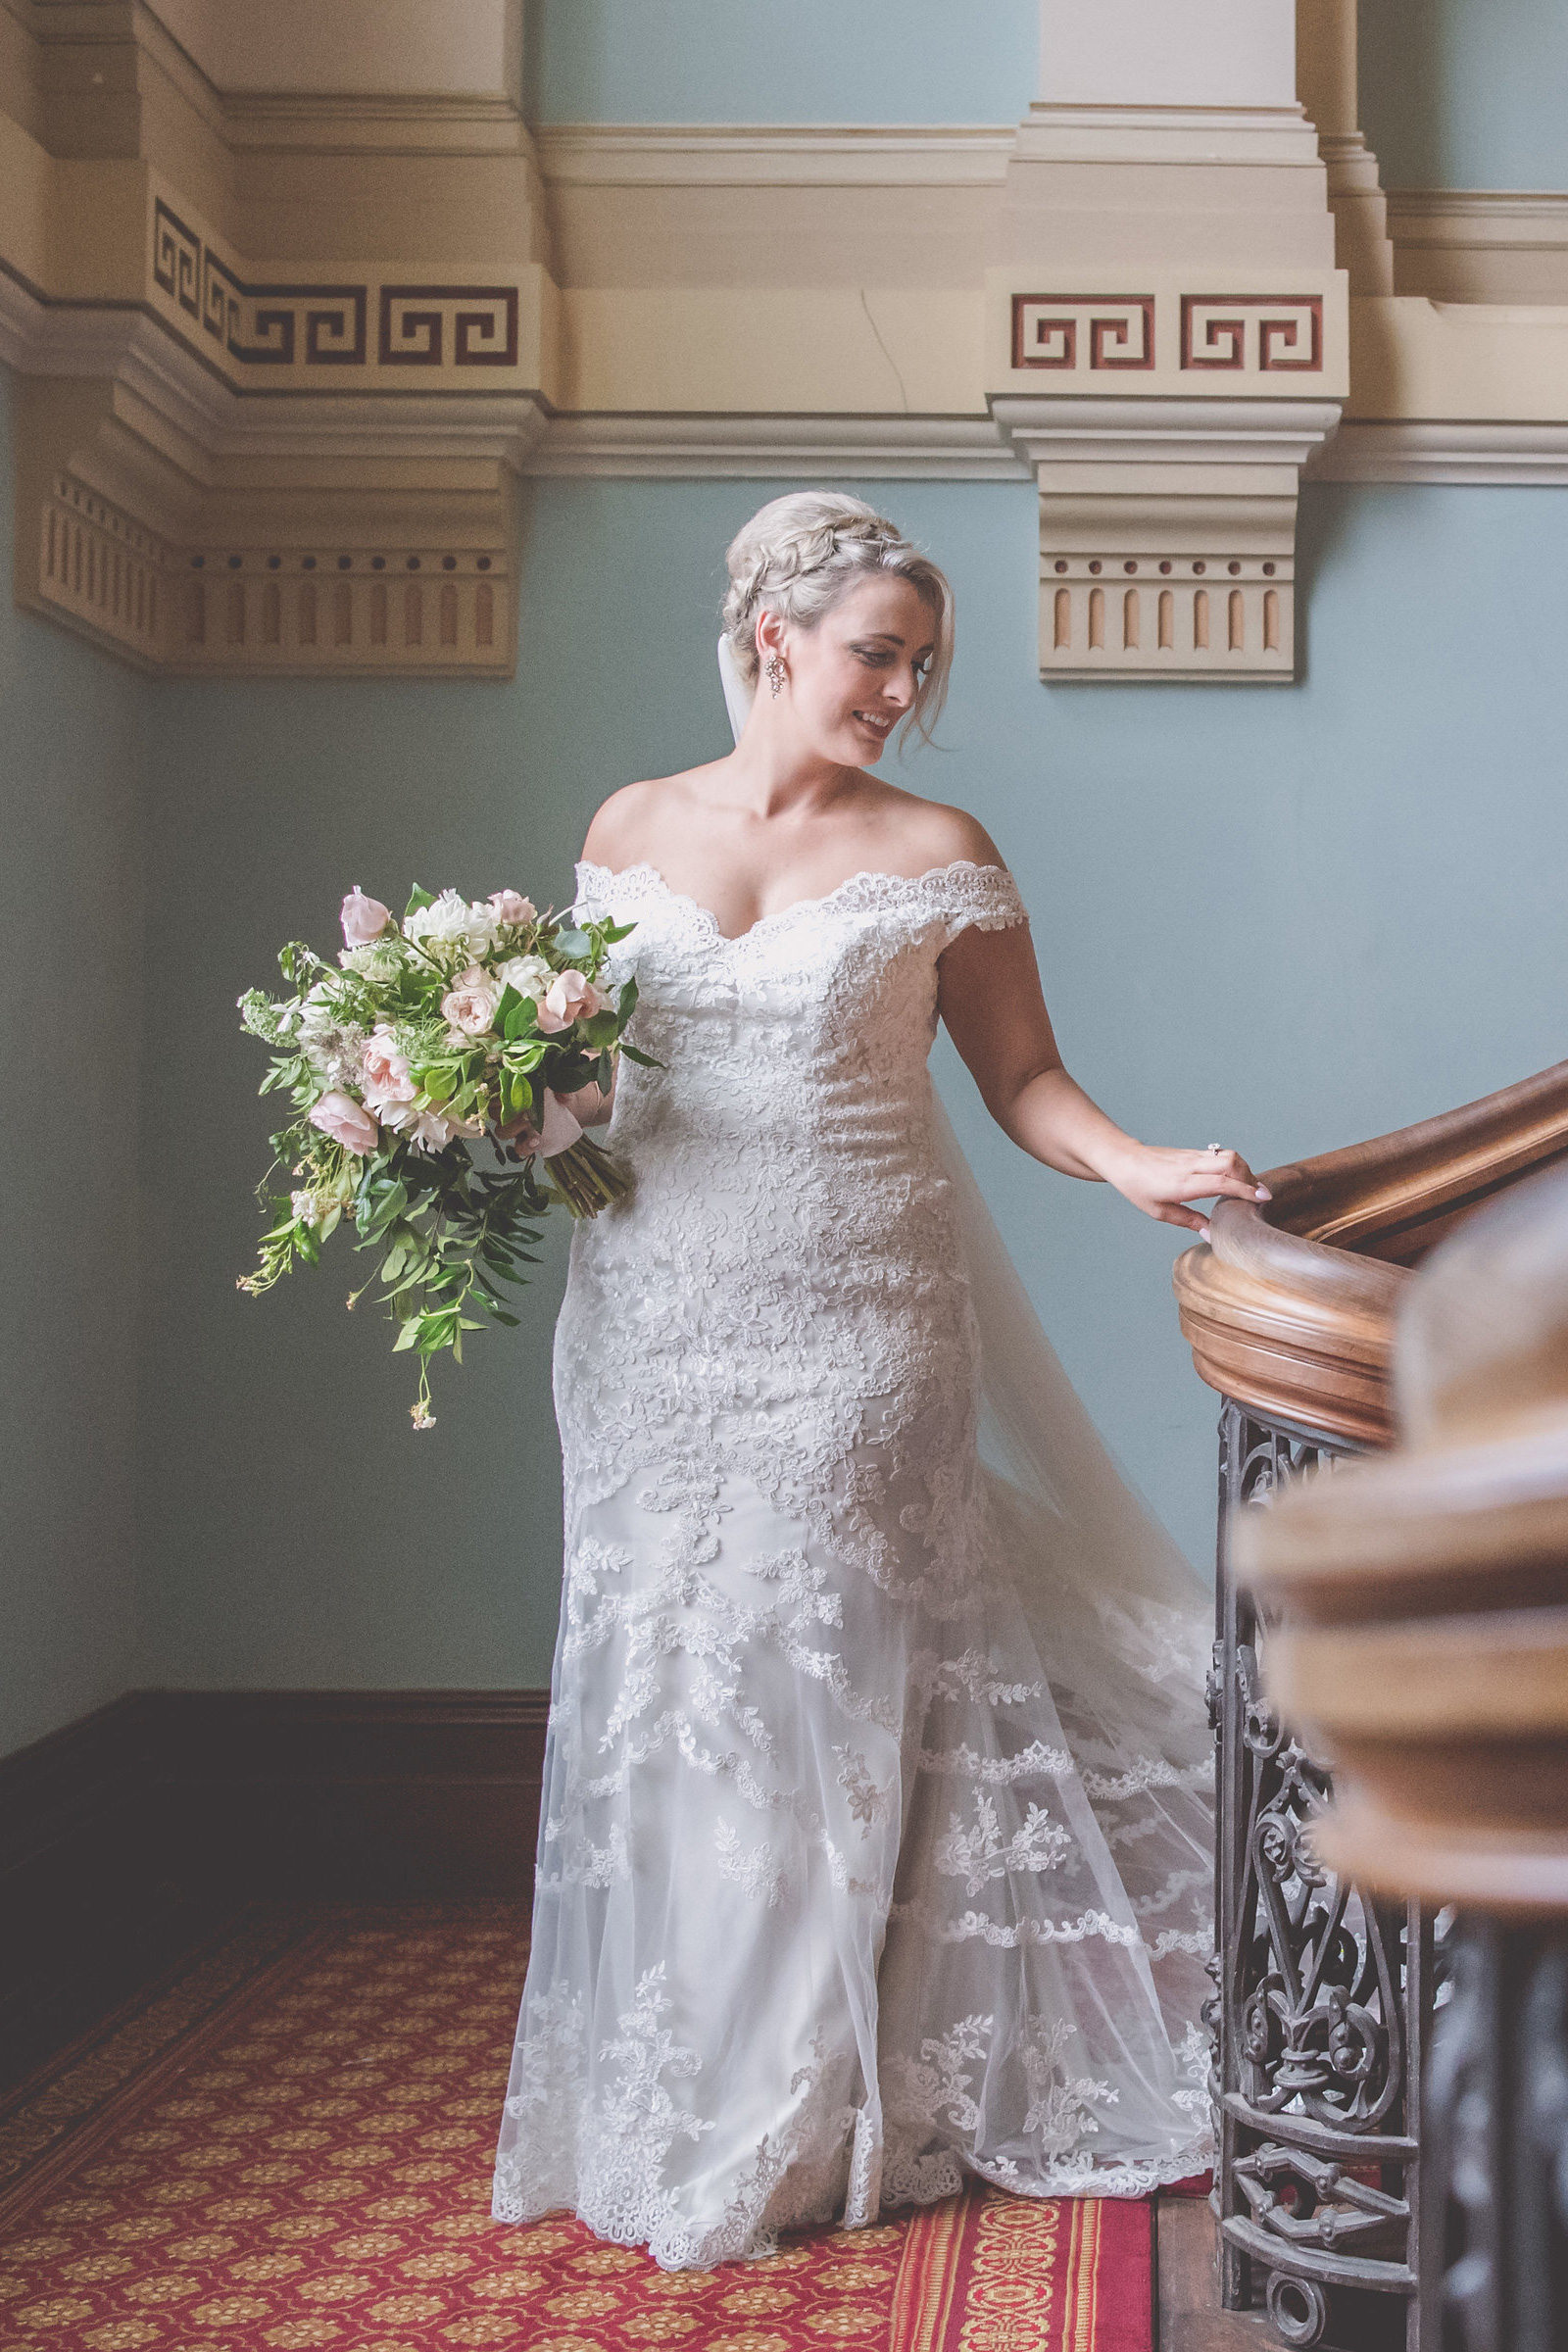 Alicia_Lachlan_Classic-Elegant-Wedding_Pauset-the-Moment_SBS_037